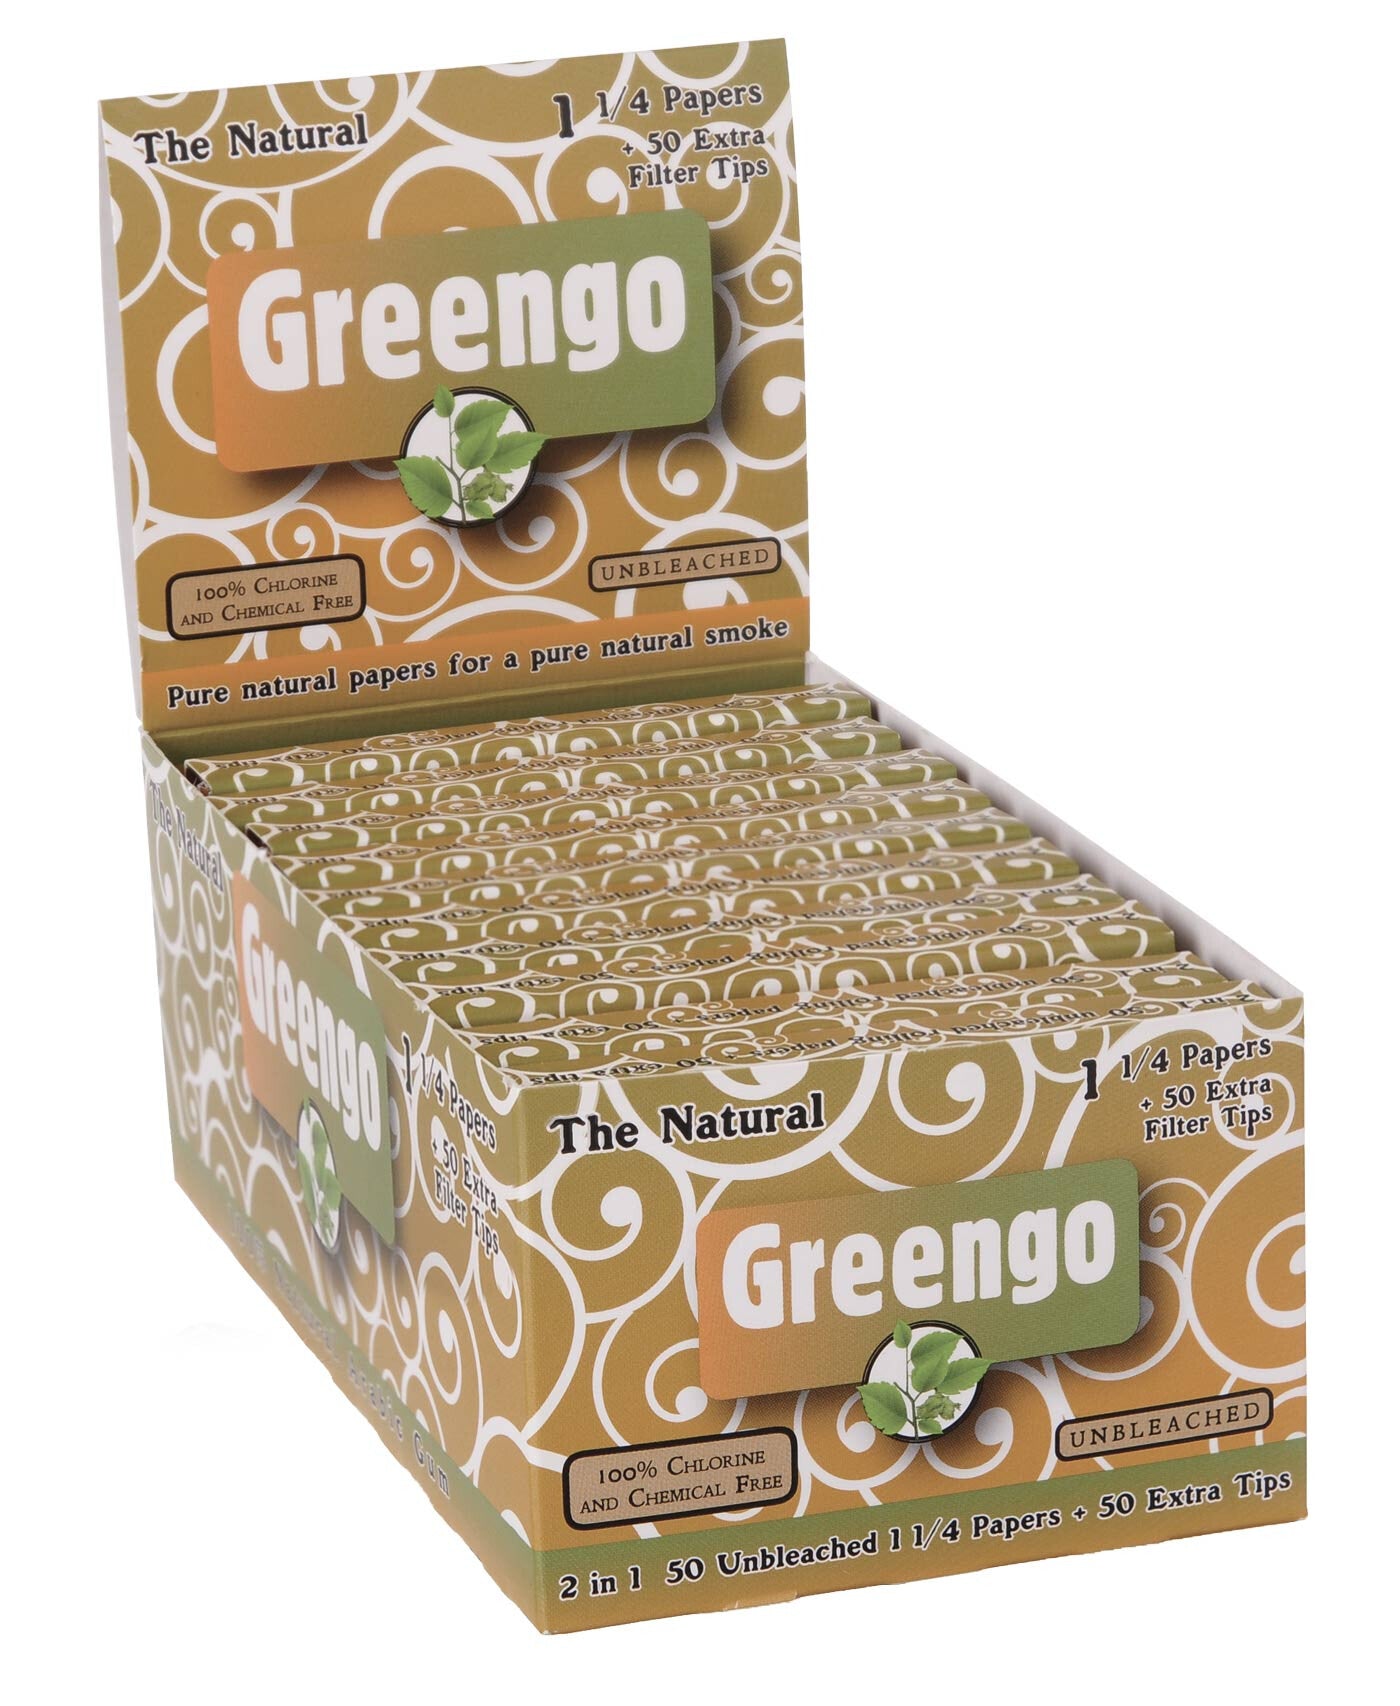 Display Greengo Unbleached 1 1/4 2 In 1 24 Pcs